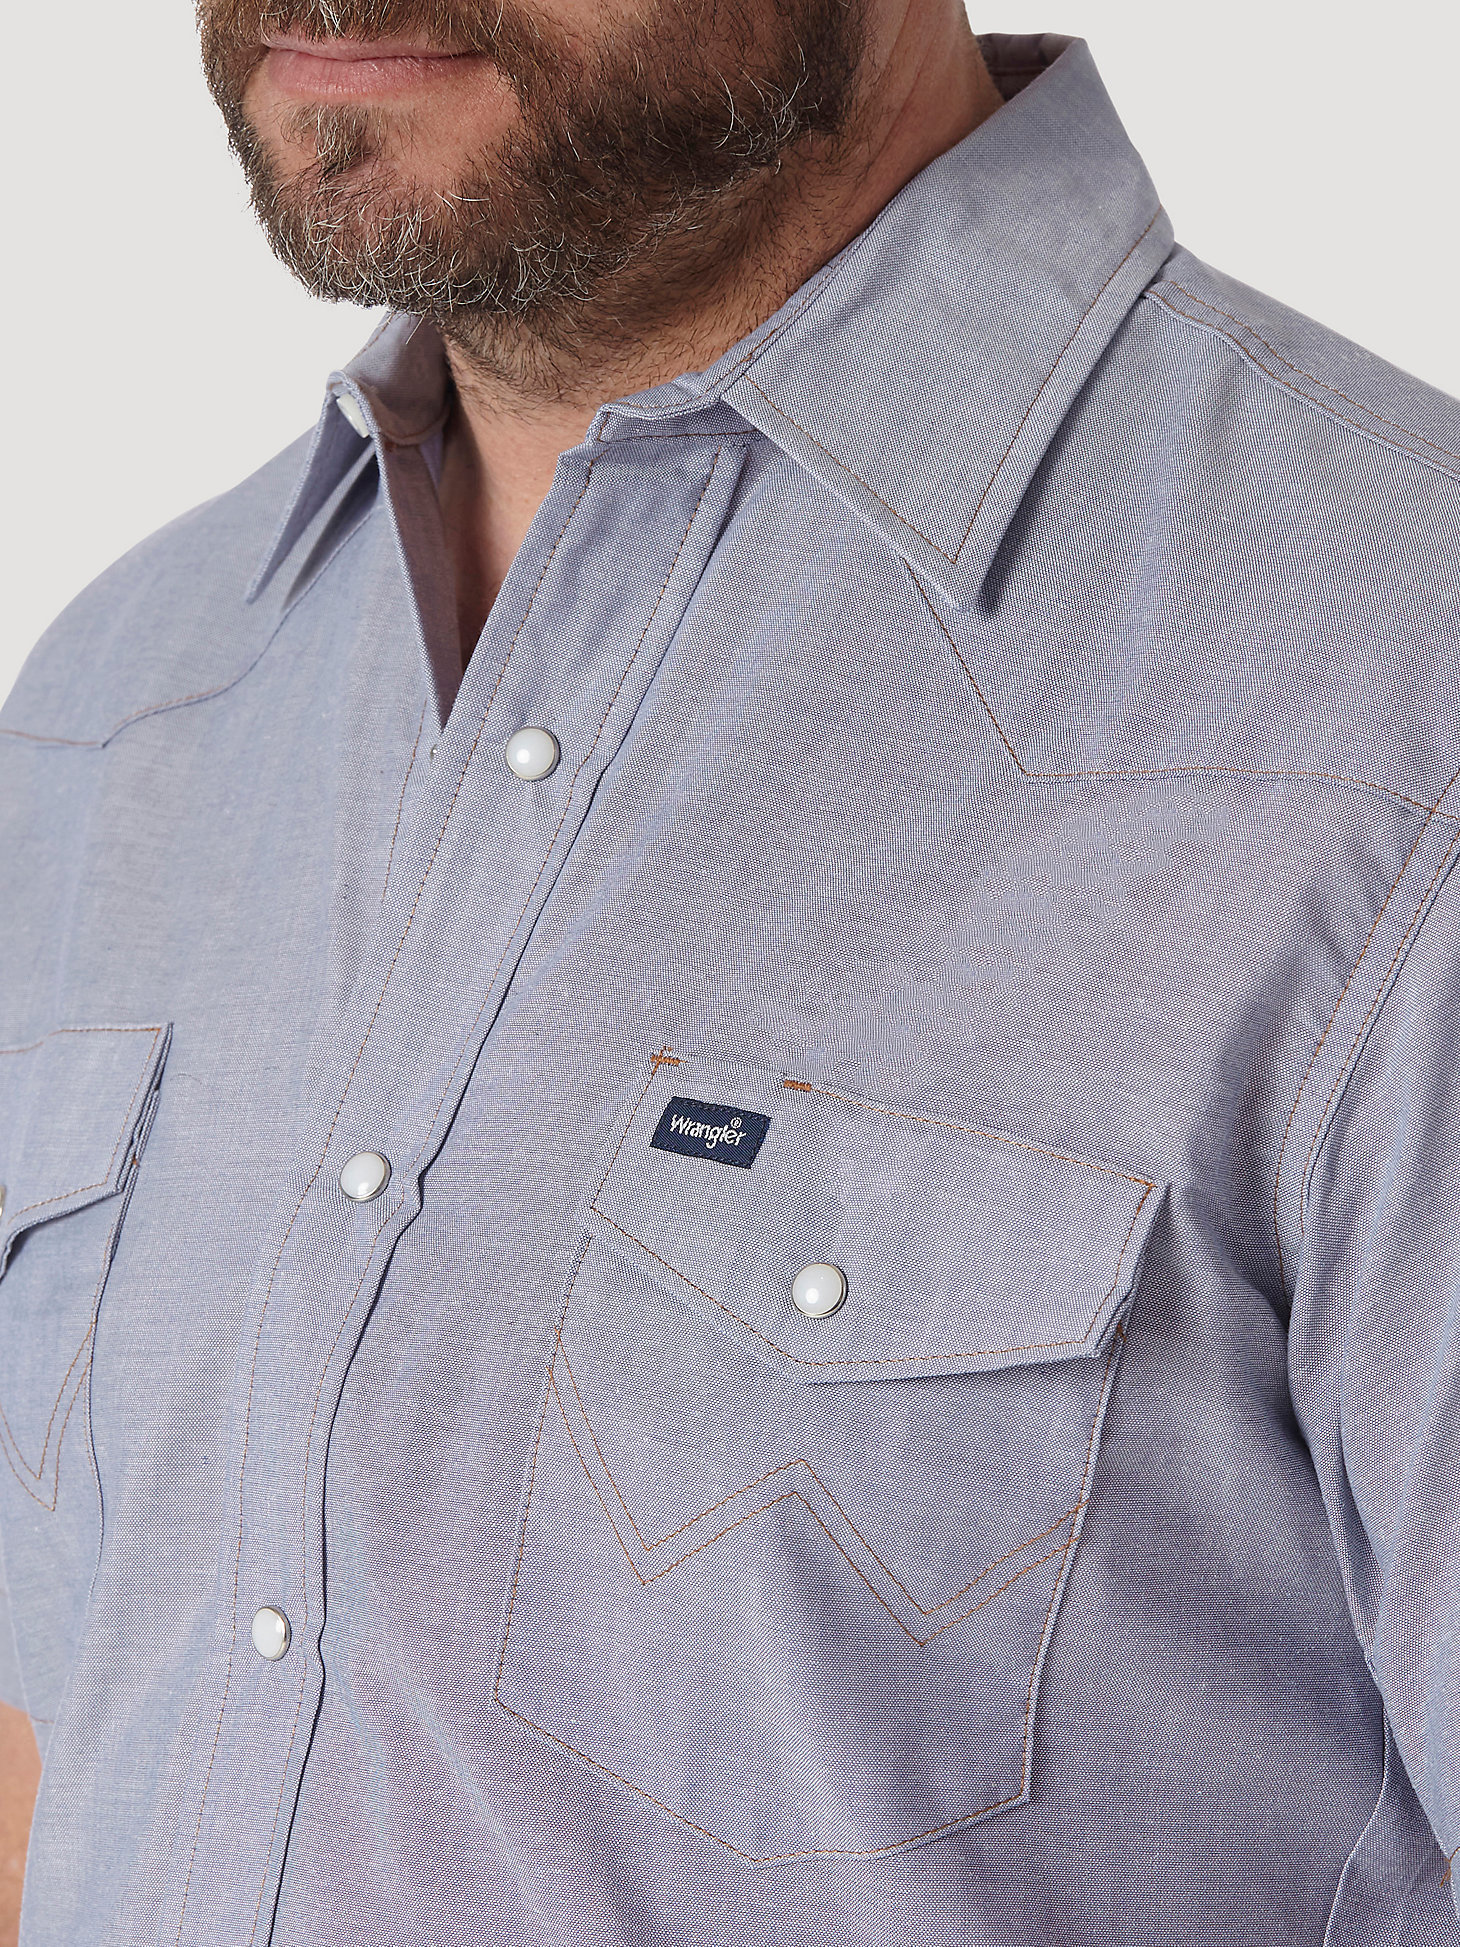 Cowboy Cut® Work Short Sleeve Western Snap Solid Chambray Shirt in Chambray alternative view 2